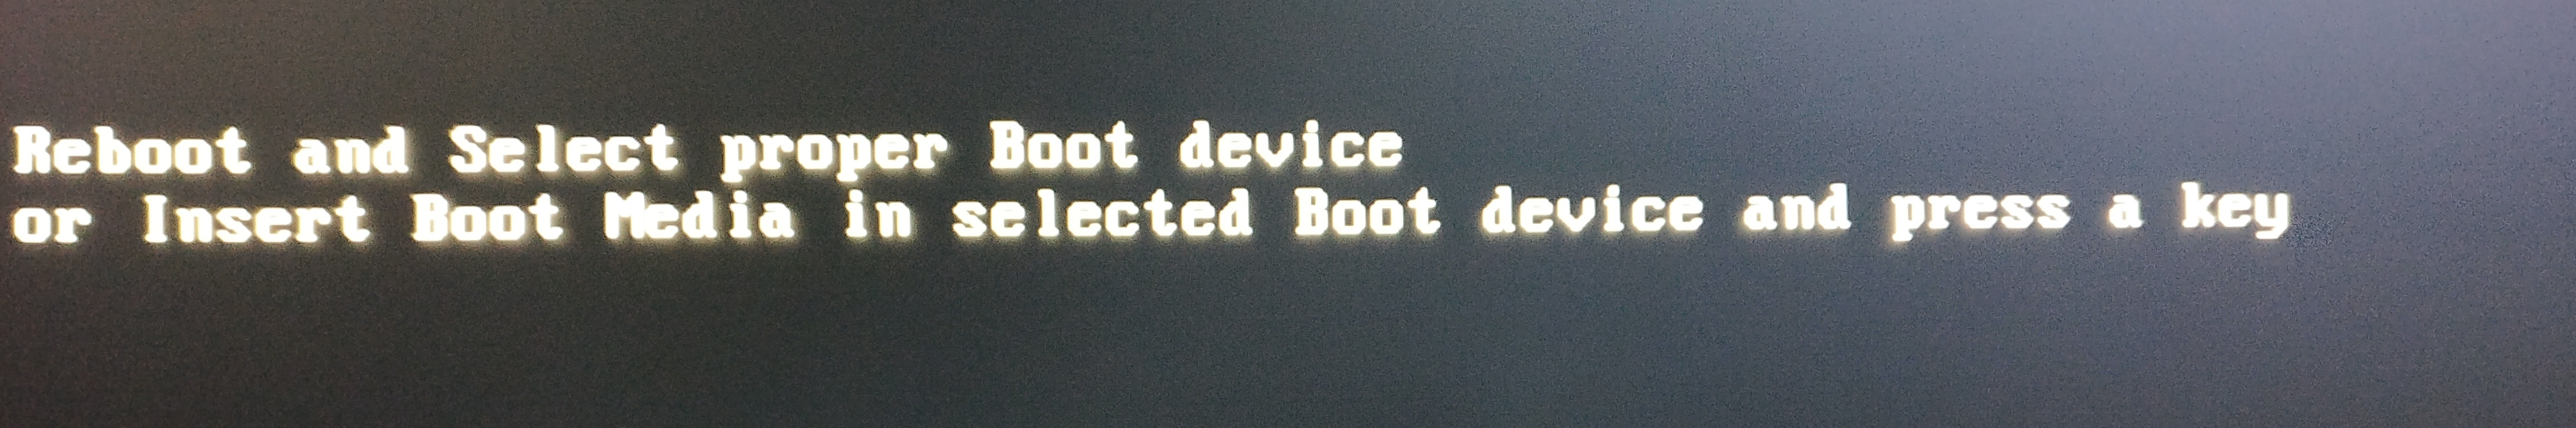 Windows 10 Reboot And Select Proper Boot Device Microsoft